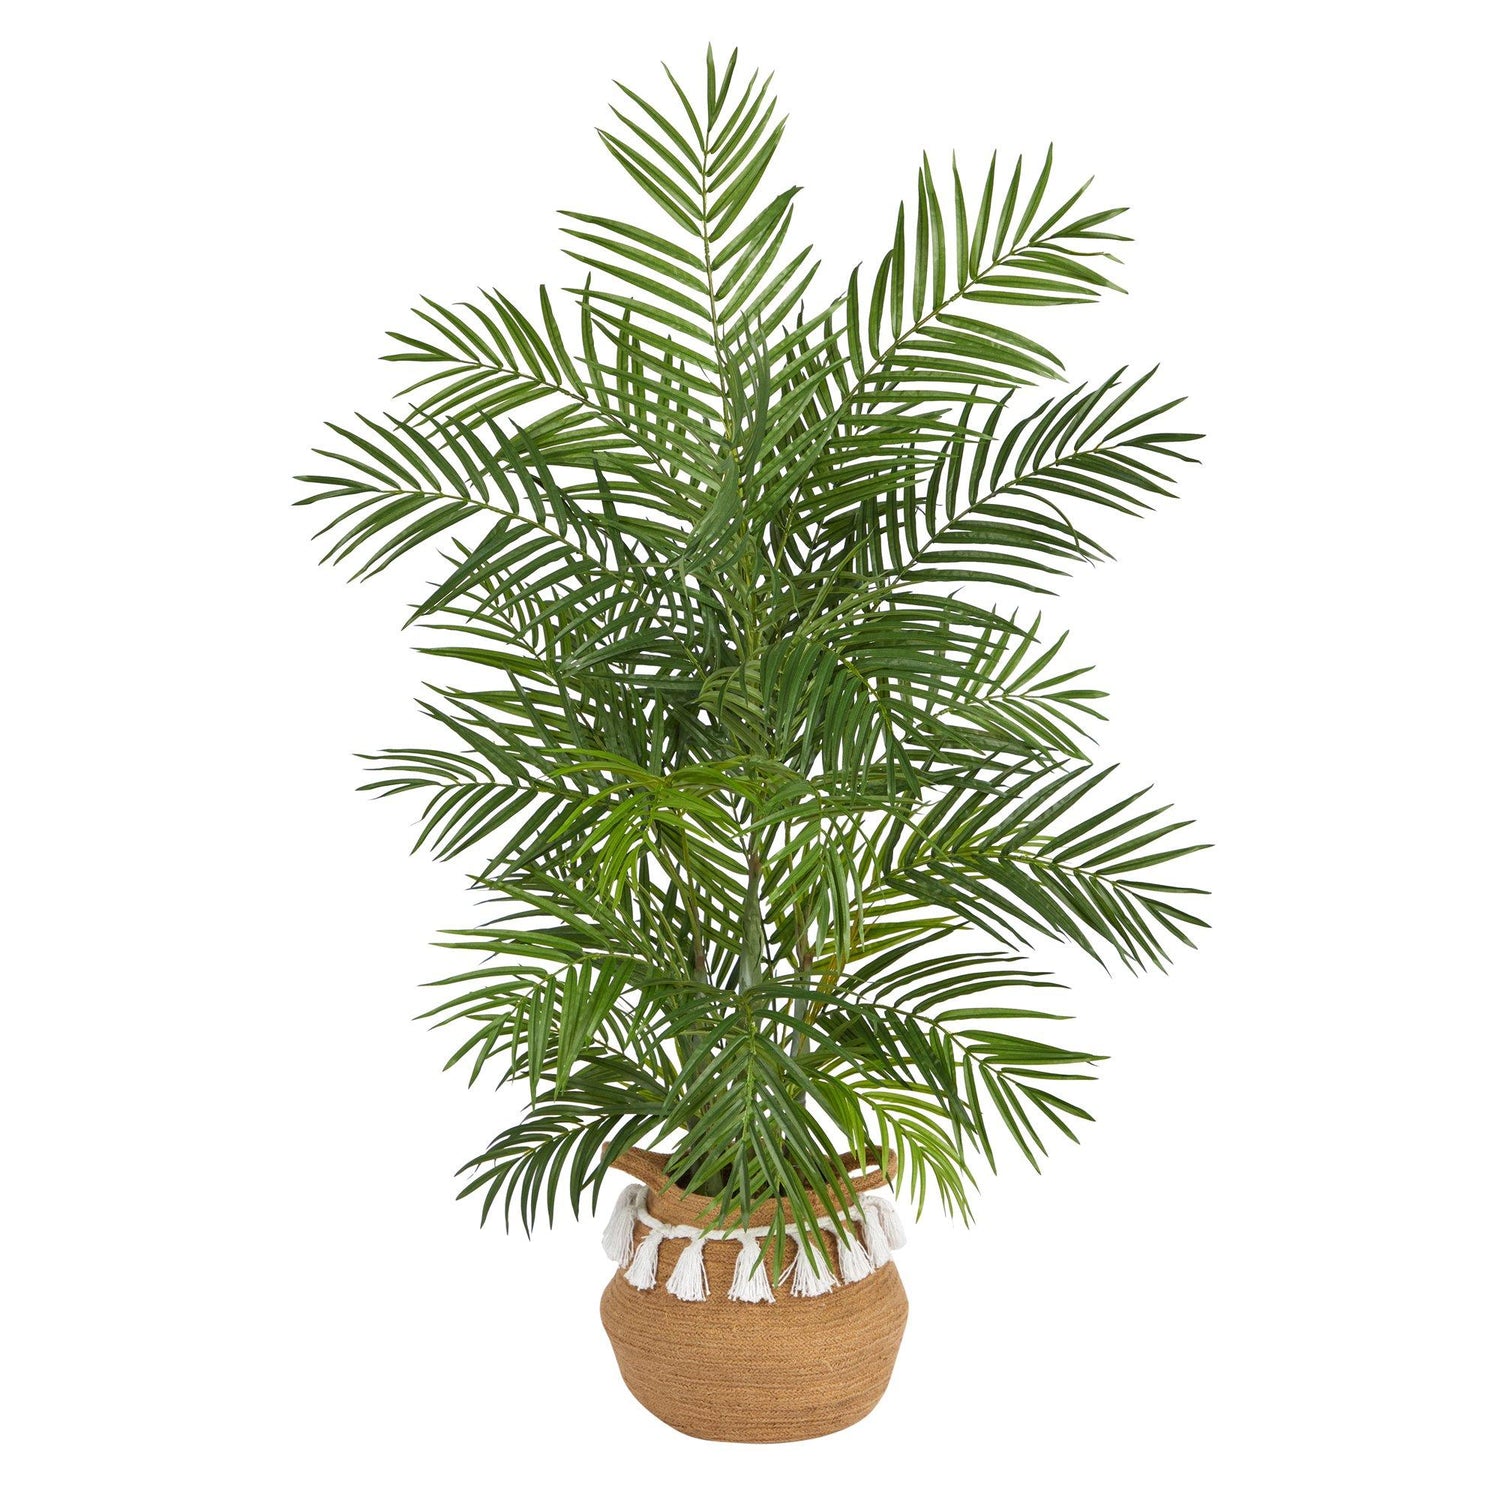 4' Areca Artificial Palm in Boho Chic Handmade Natural Cotton Woven Planter with Tassels